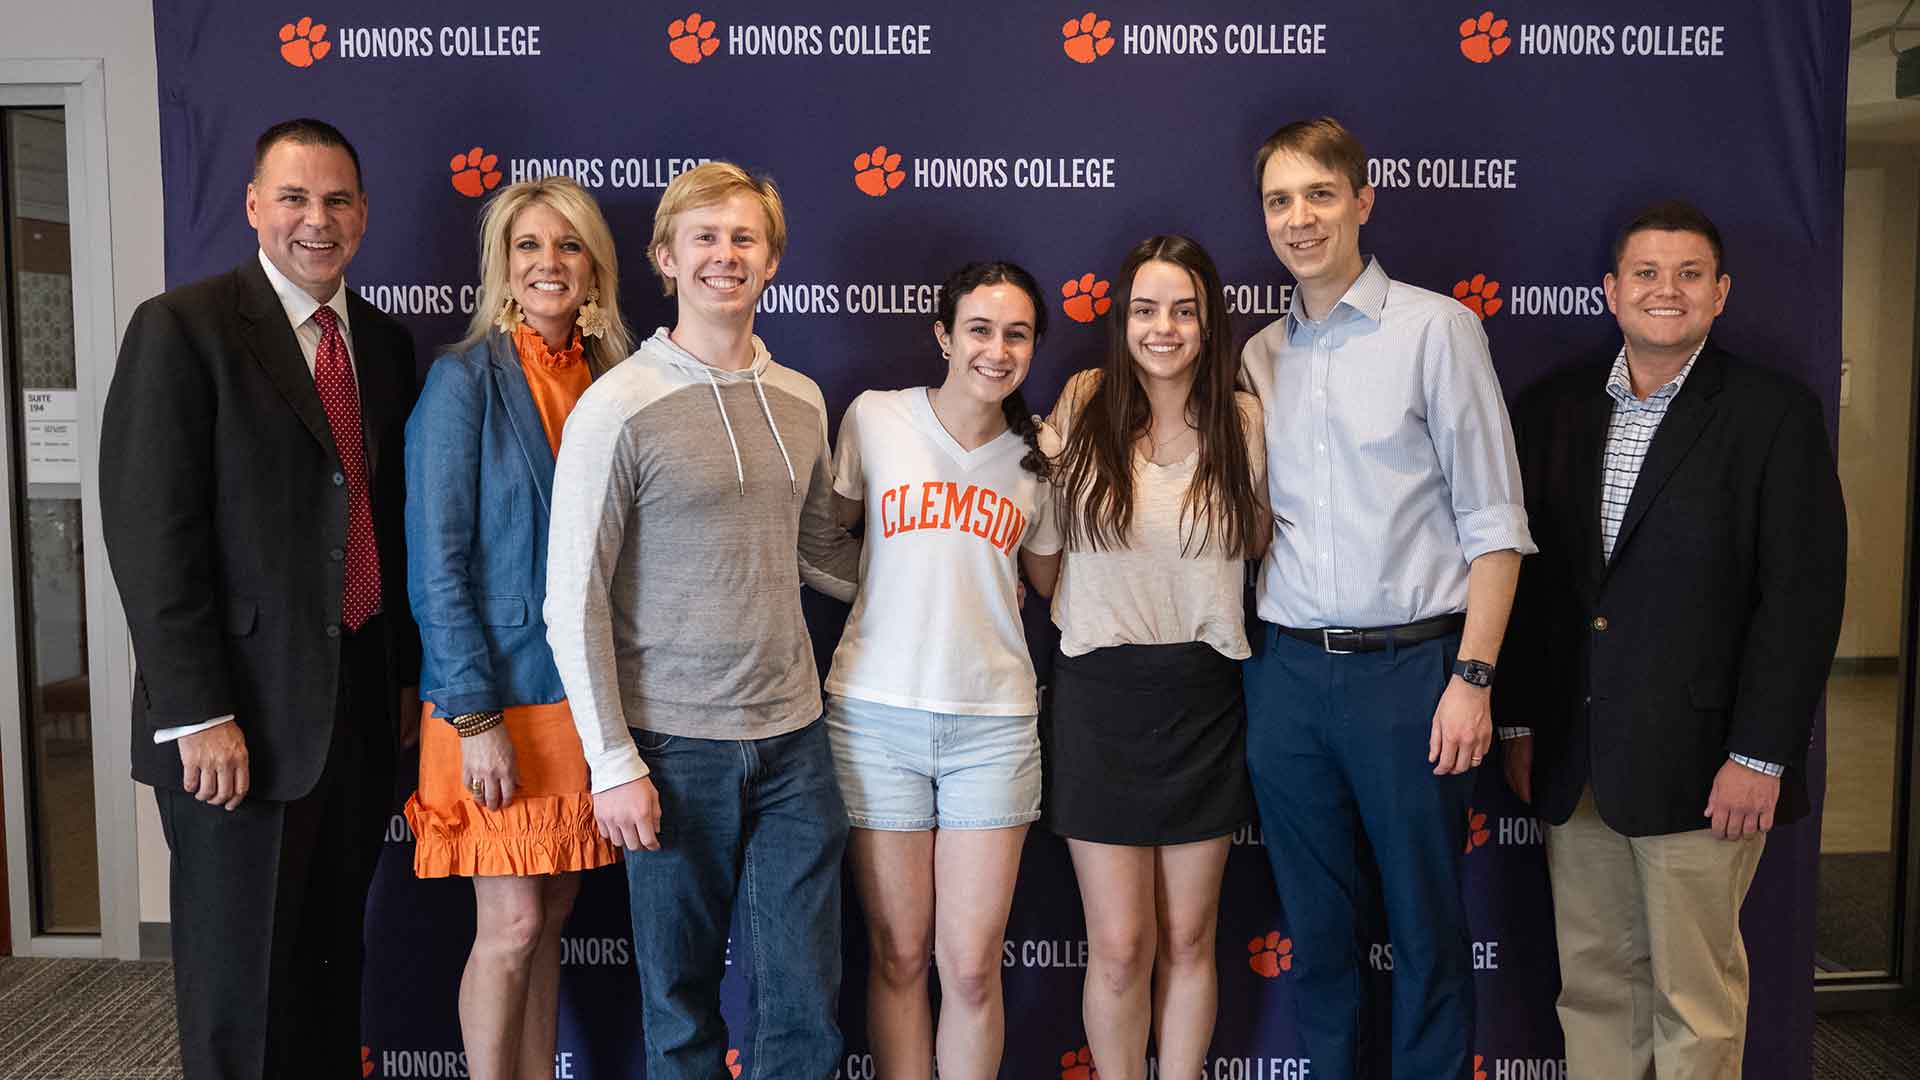 Seven people standing in front of an Honors College backdrop.